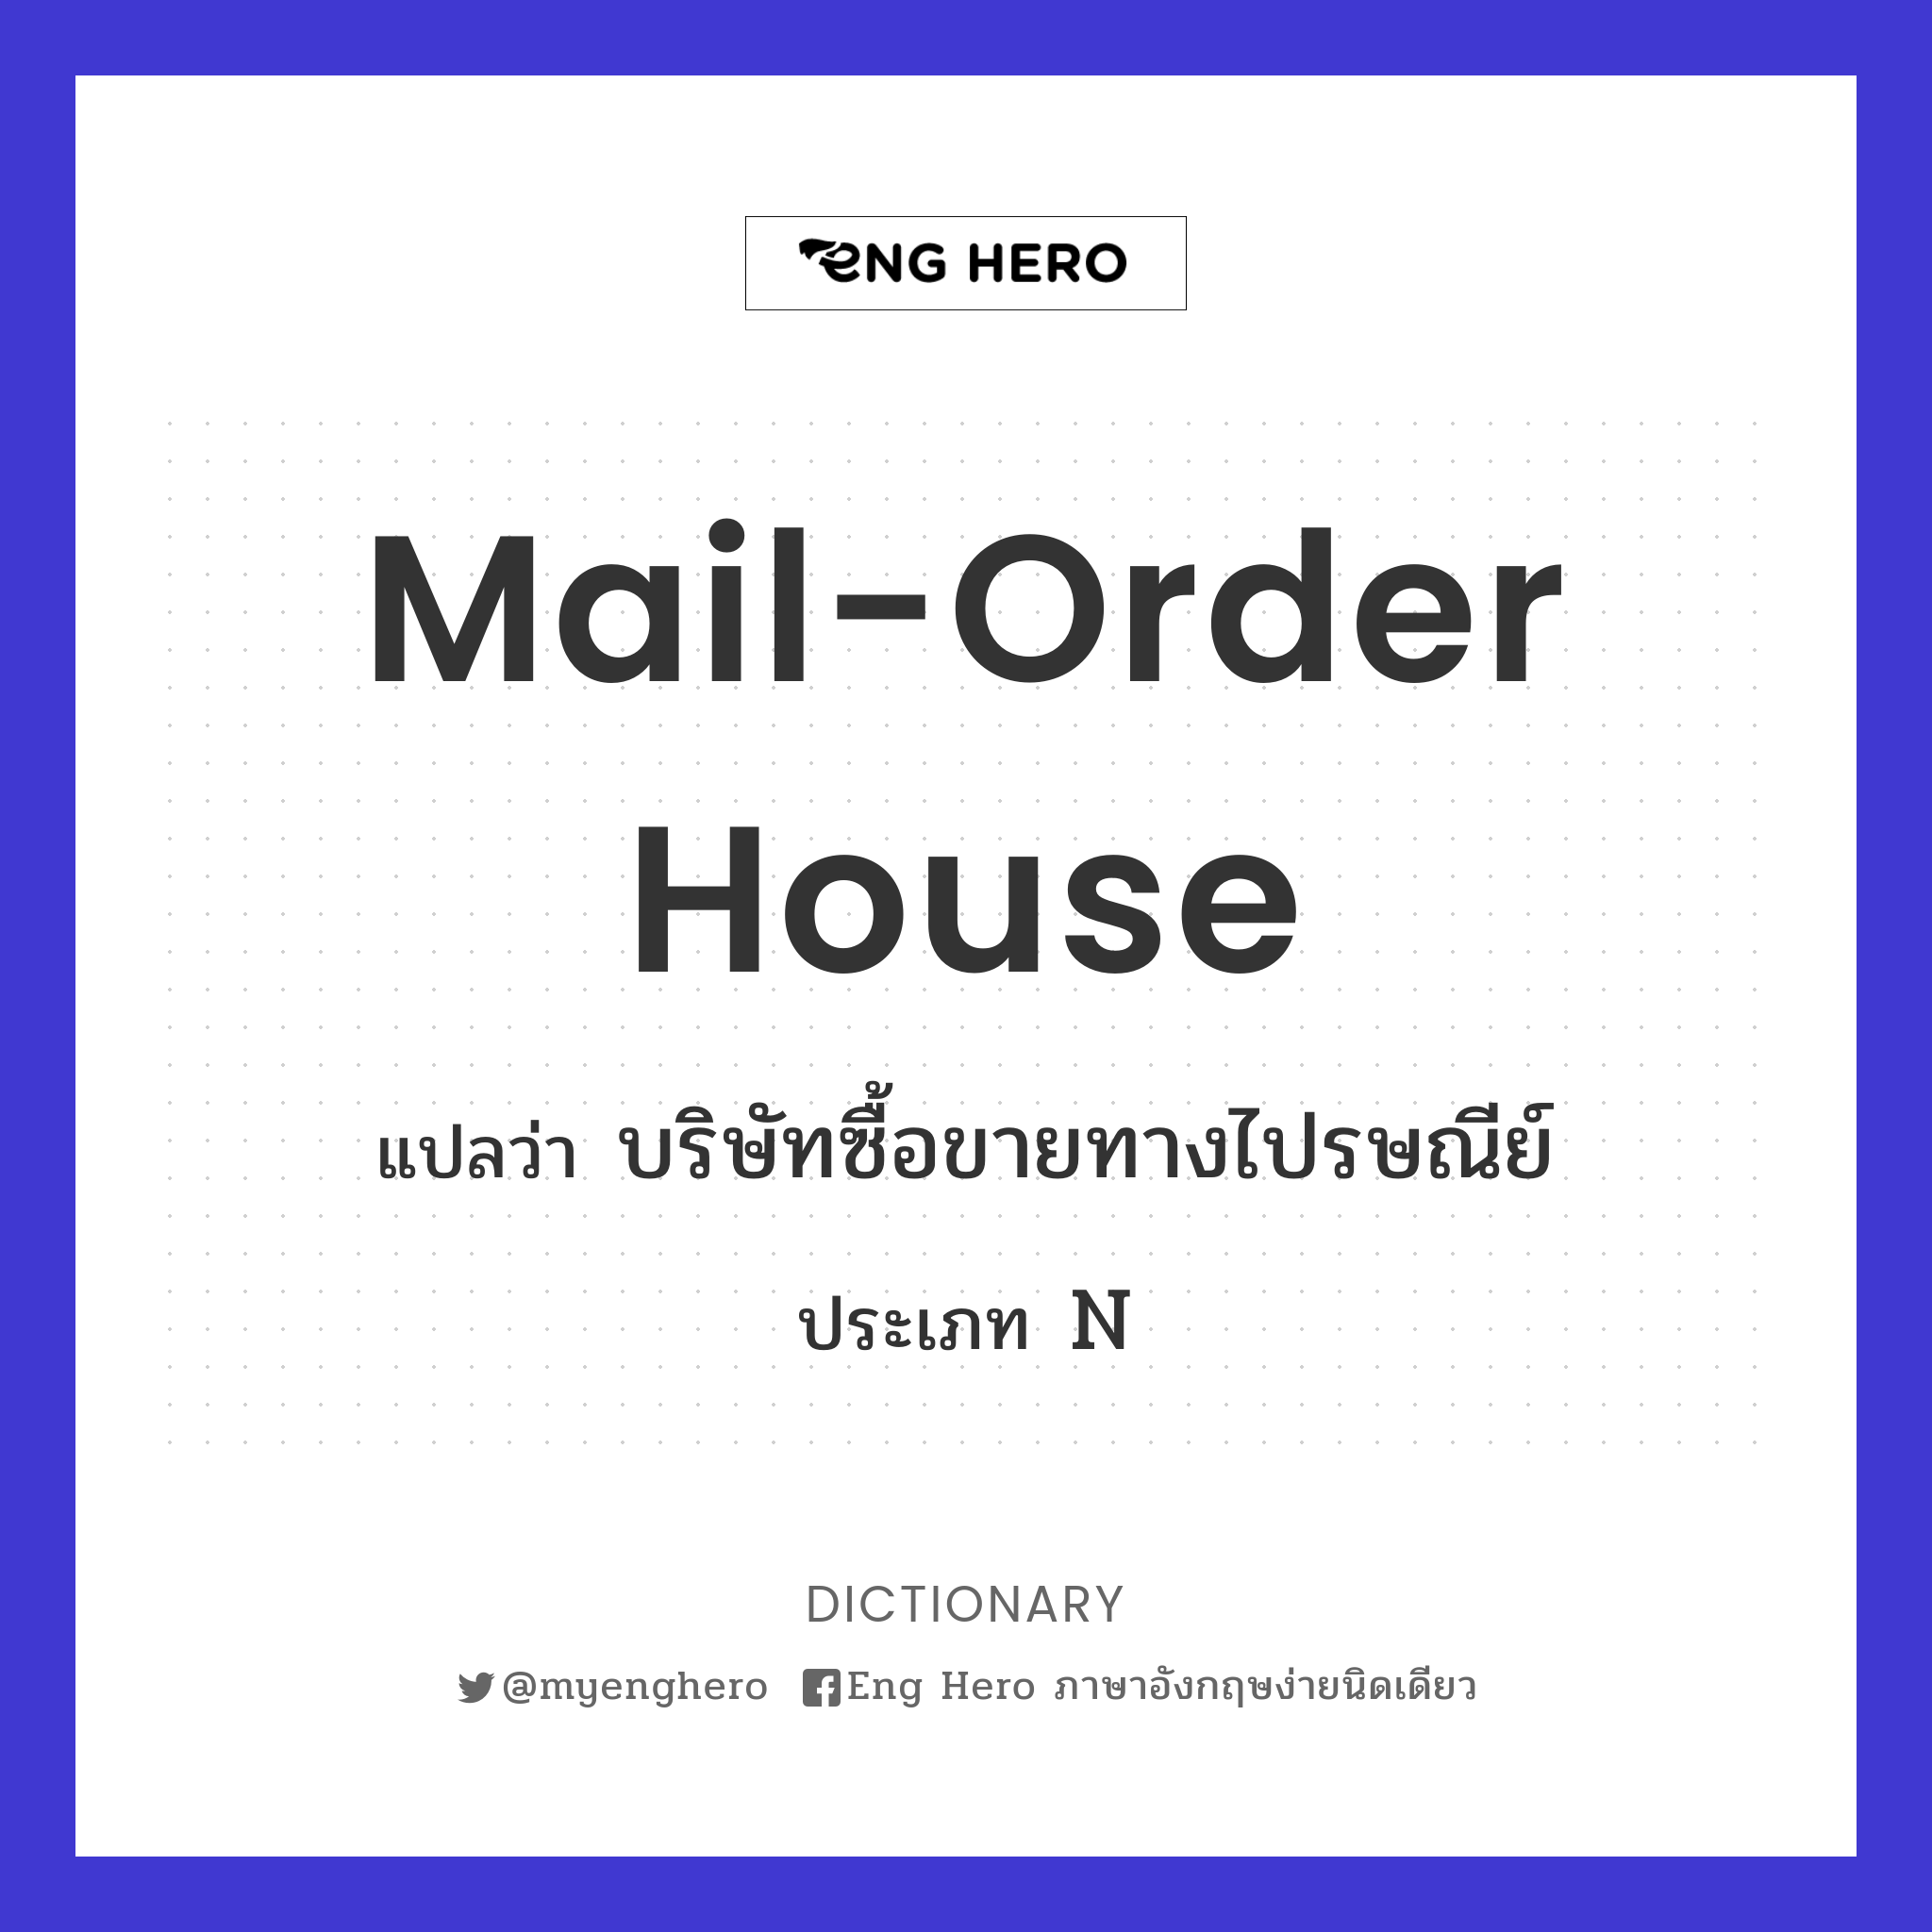 mail-order house